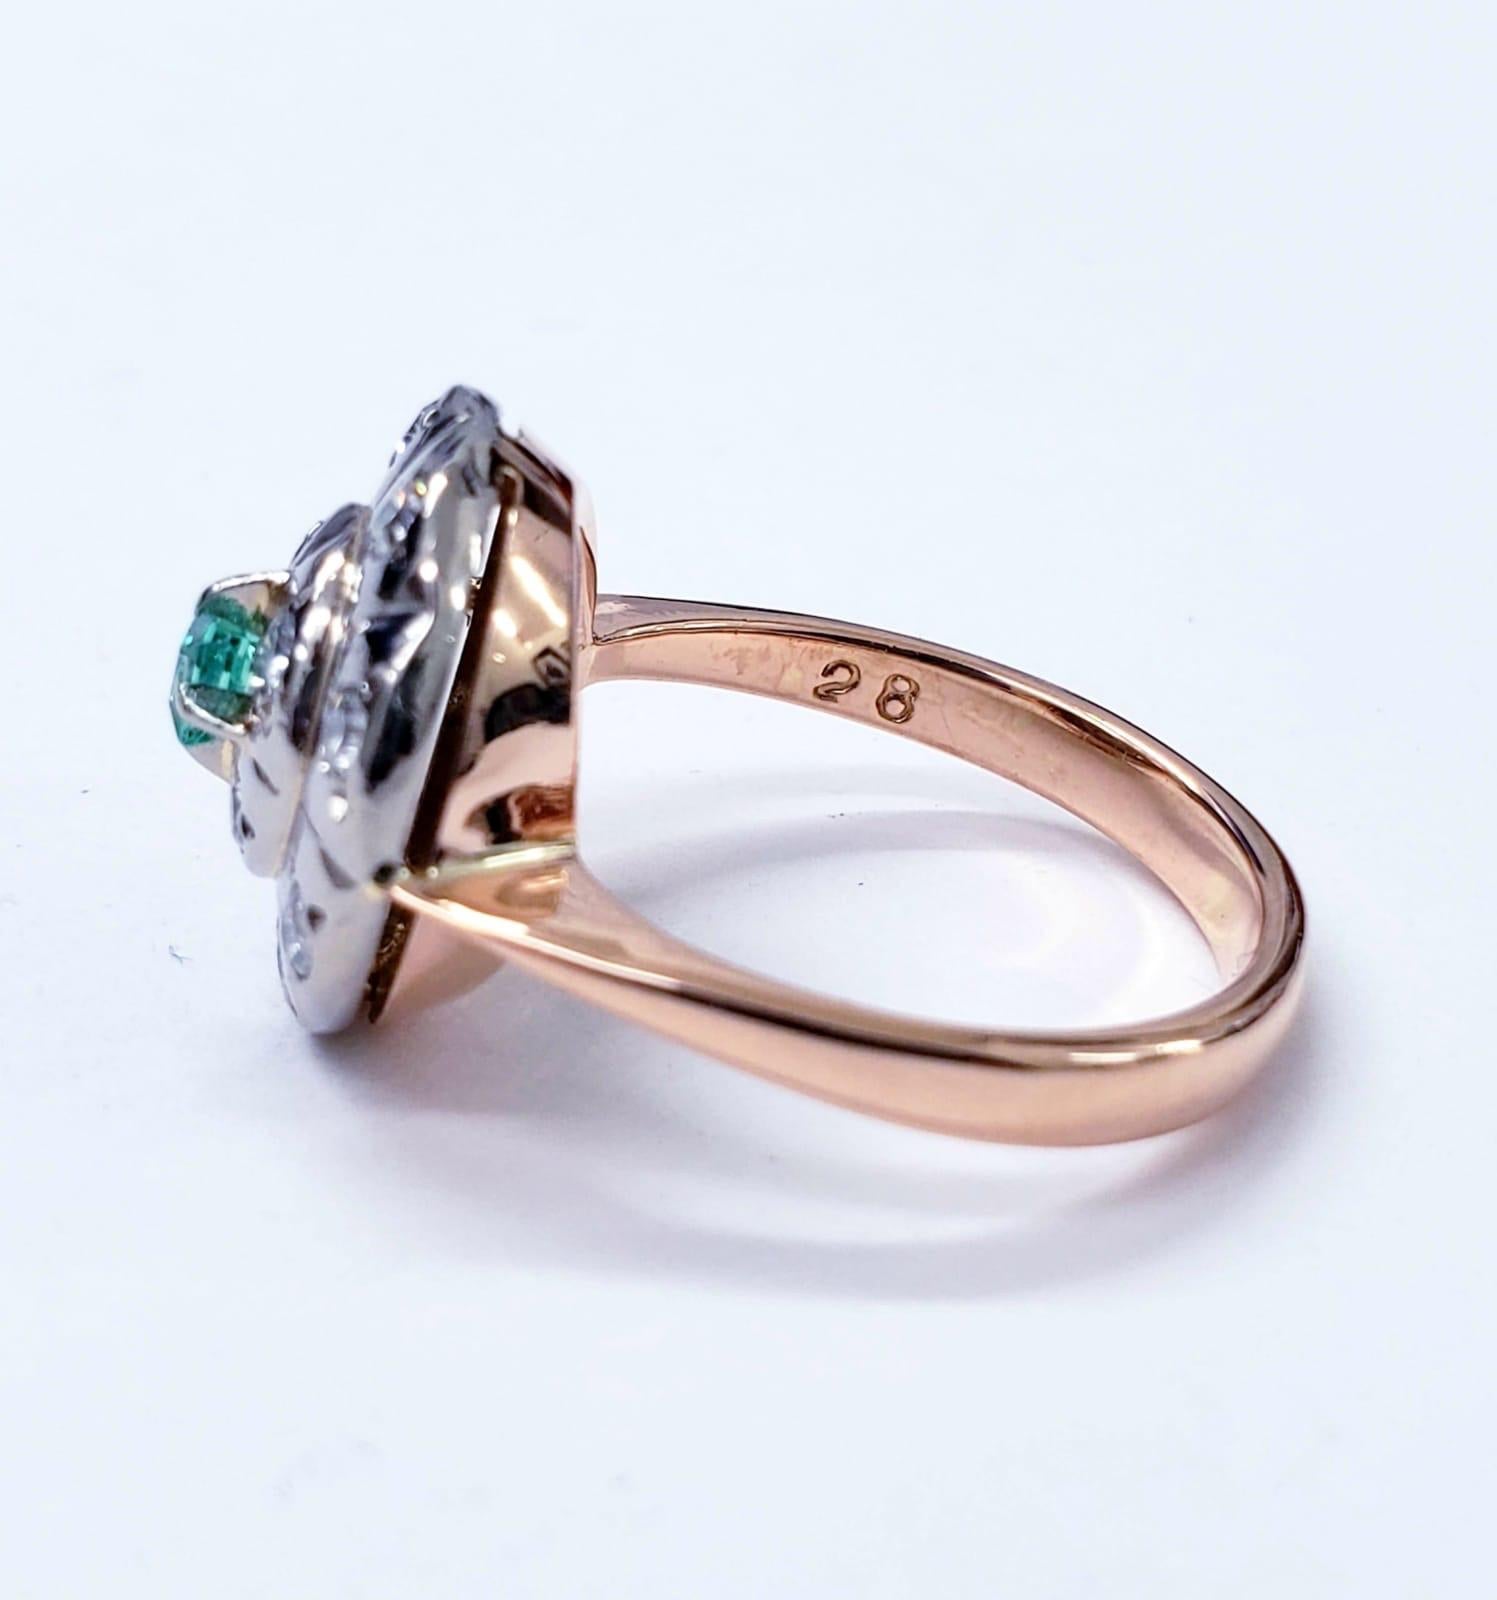 Women's Antique Retro 1.30 Carat Diamonds and Emerald 583 Pink Gold Ring For Sale